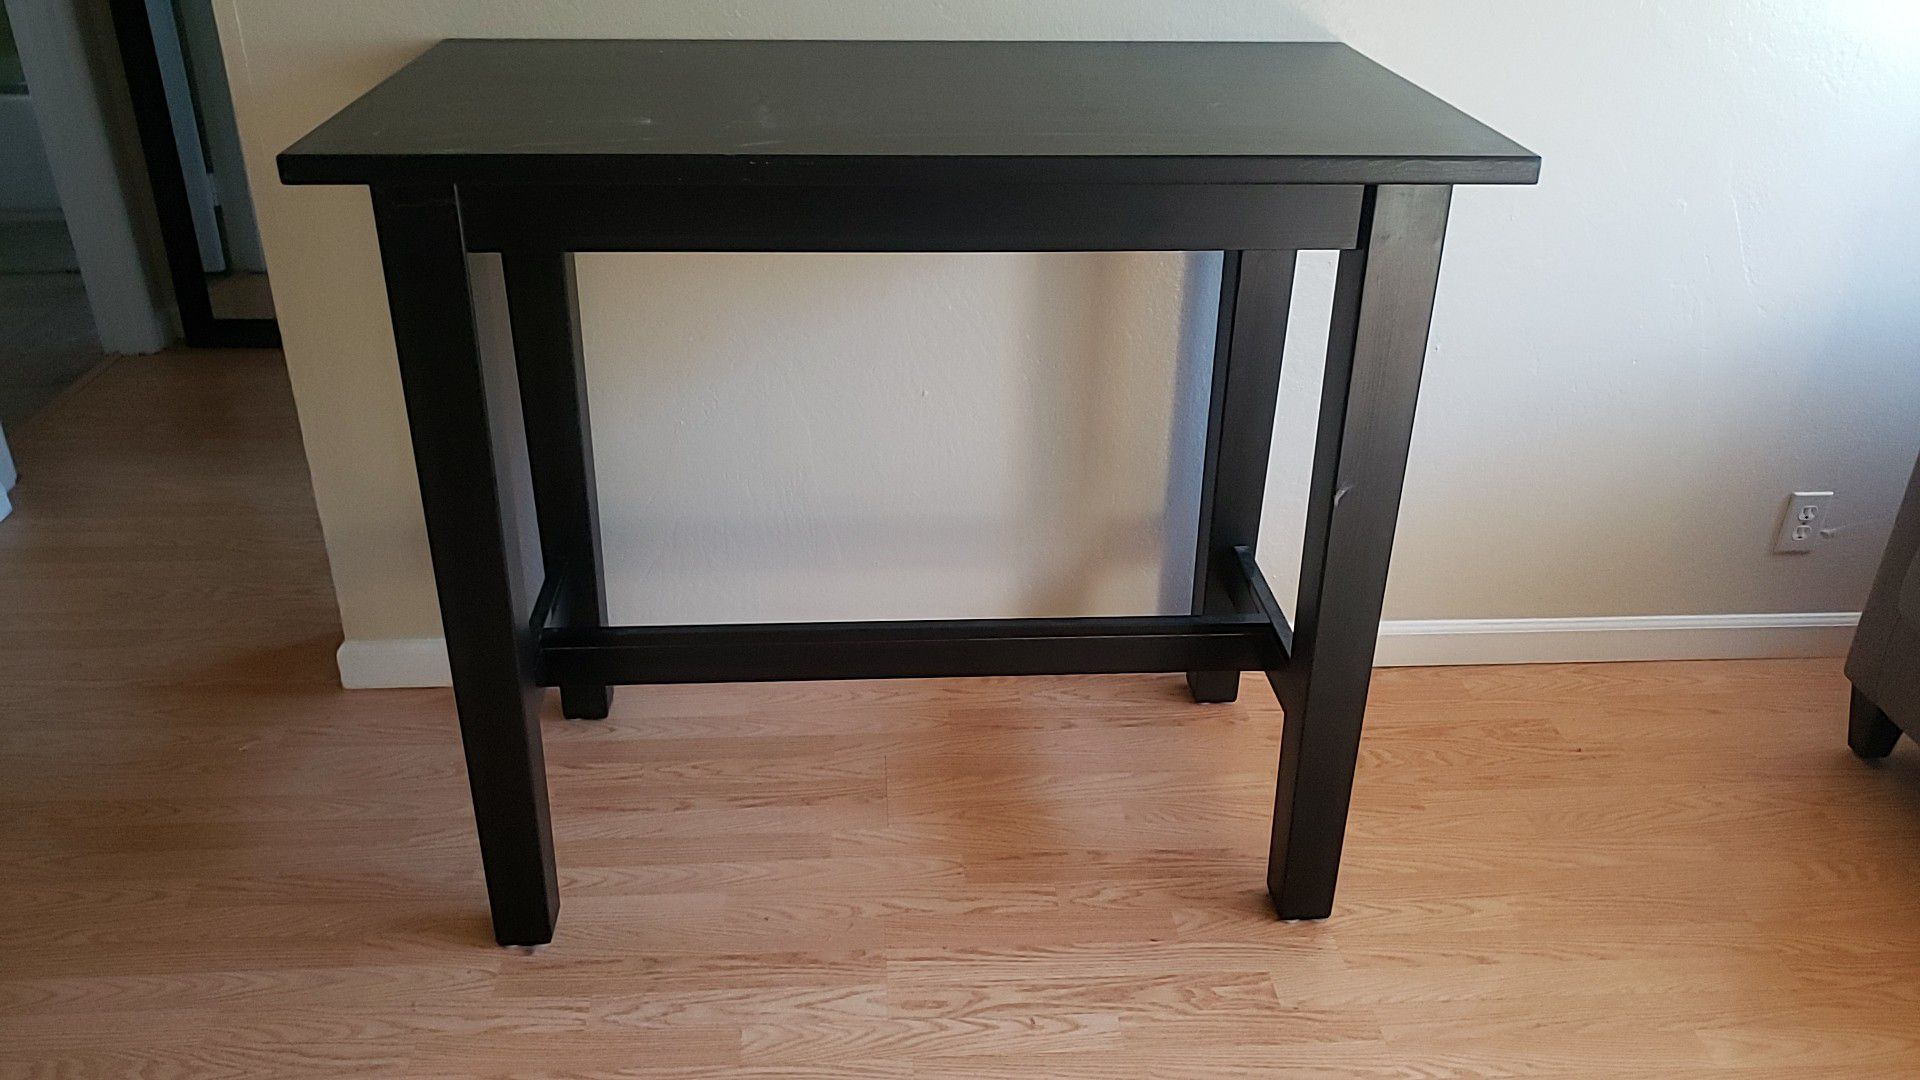 4ft tall kitchen table for sale